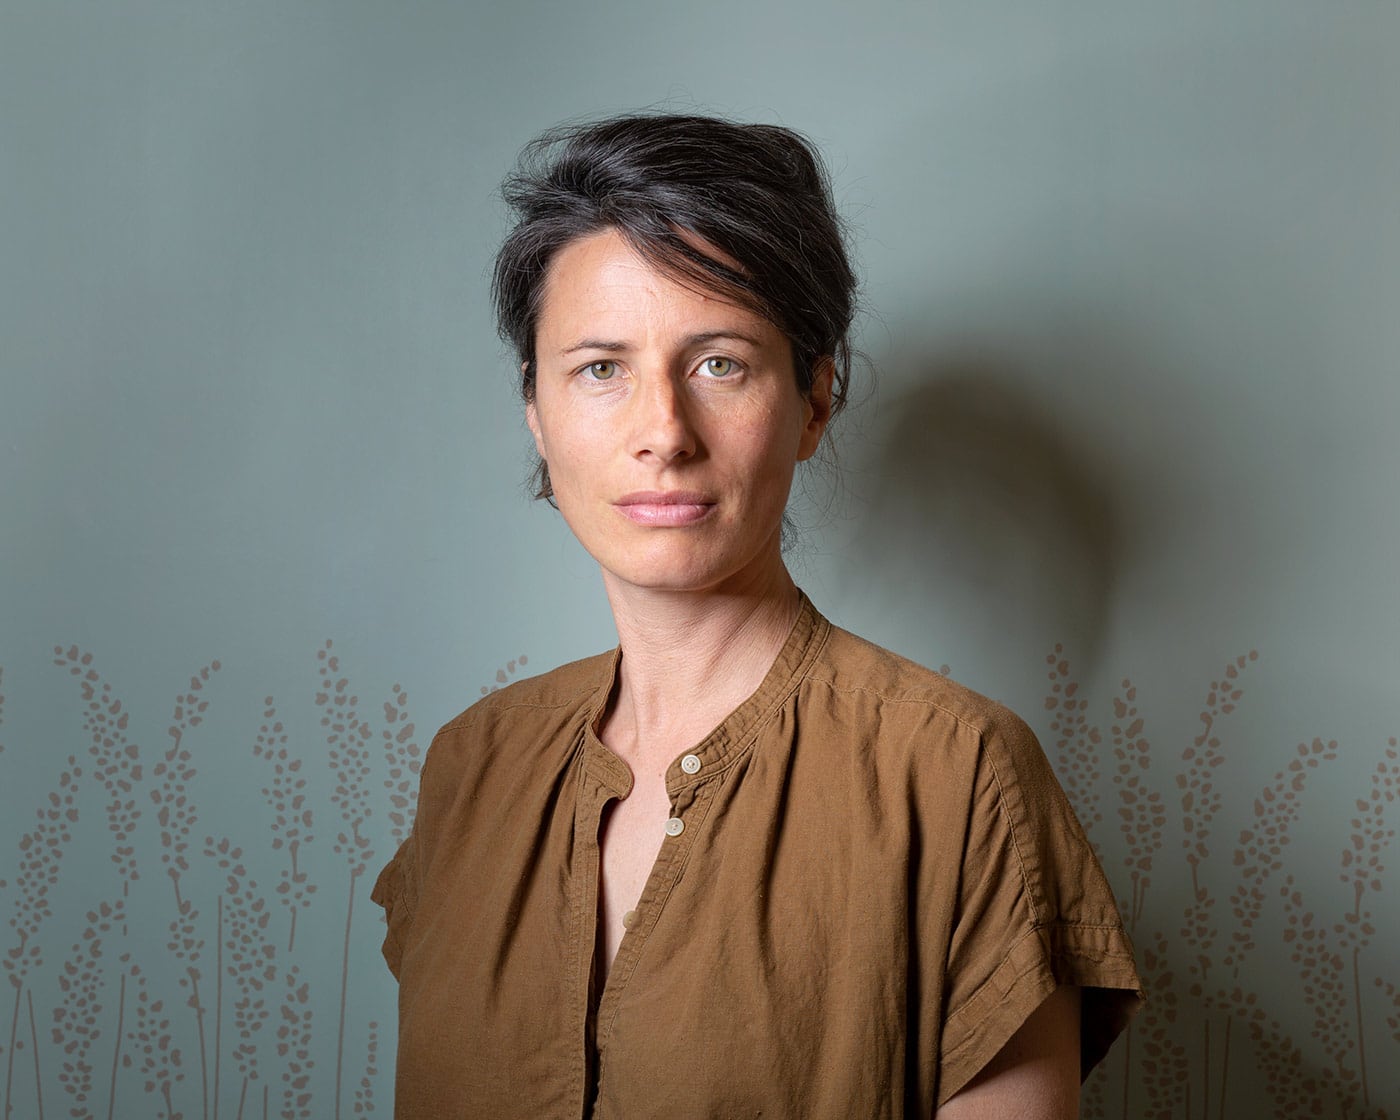 Horizontal portrait of Rebecca Marshall in brown shirt in front of pale green-blue wallpaper with a grass pattern